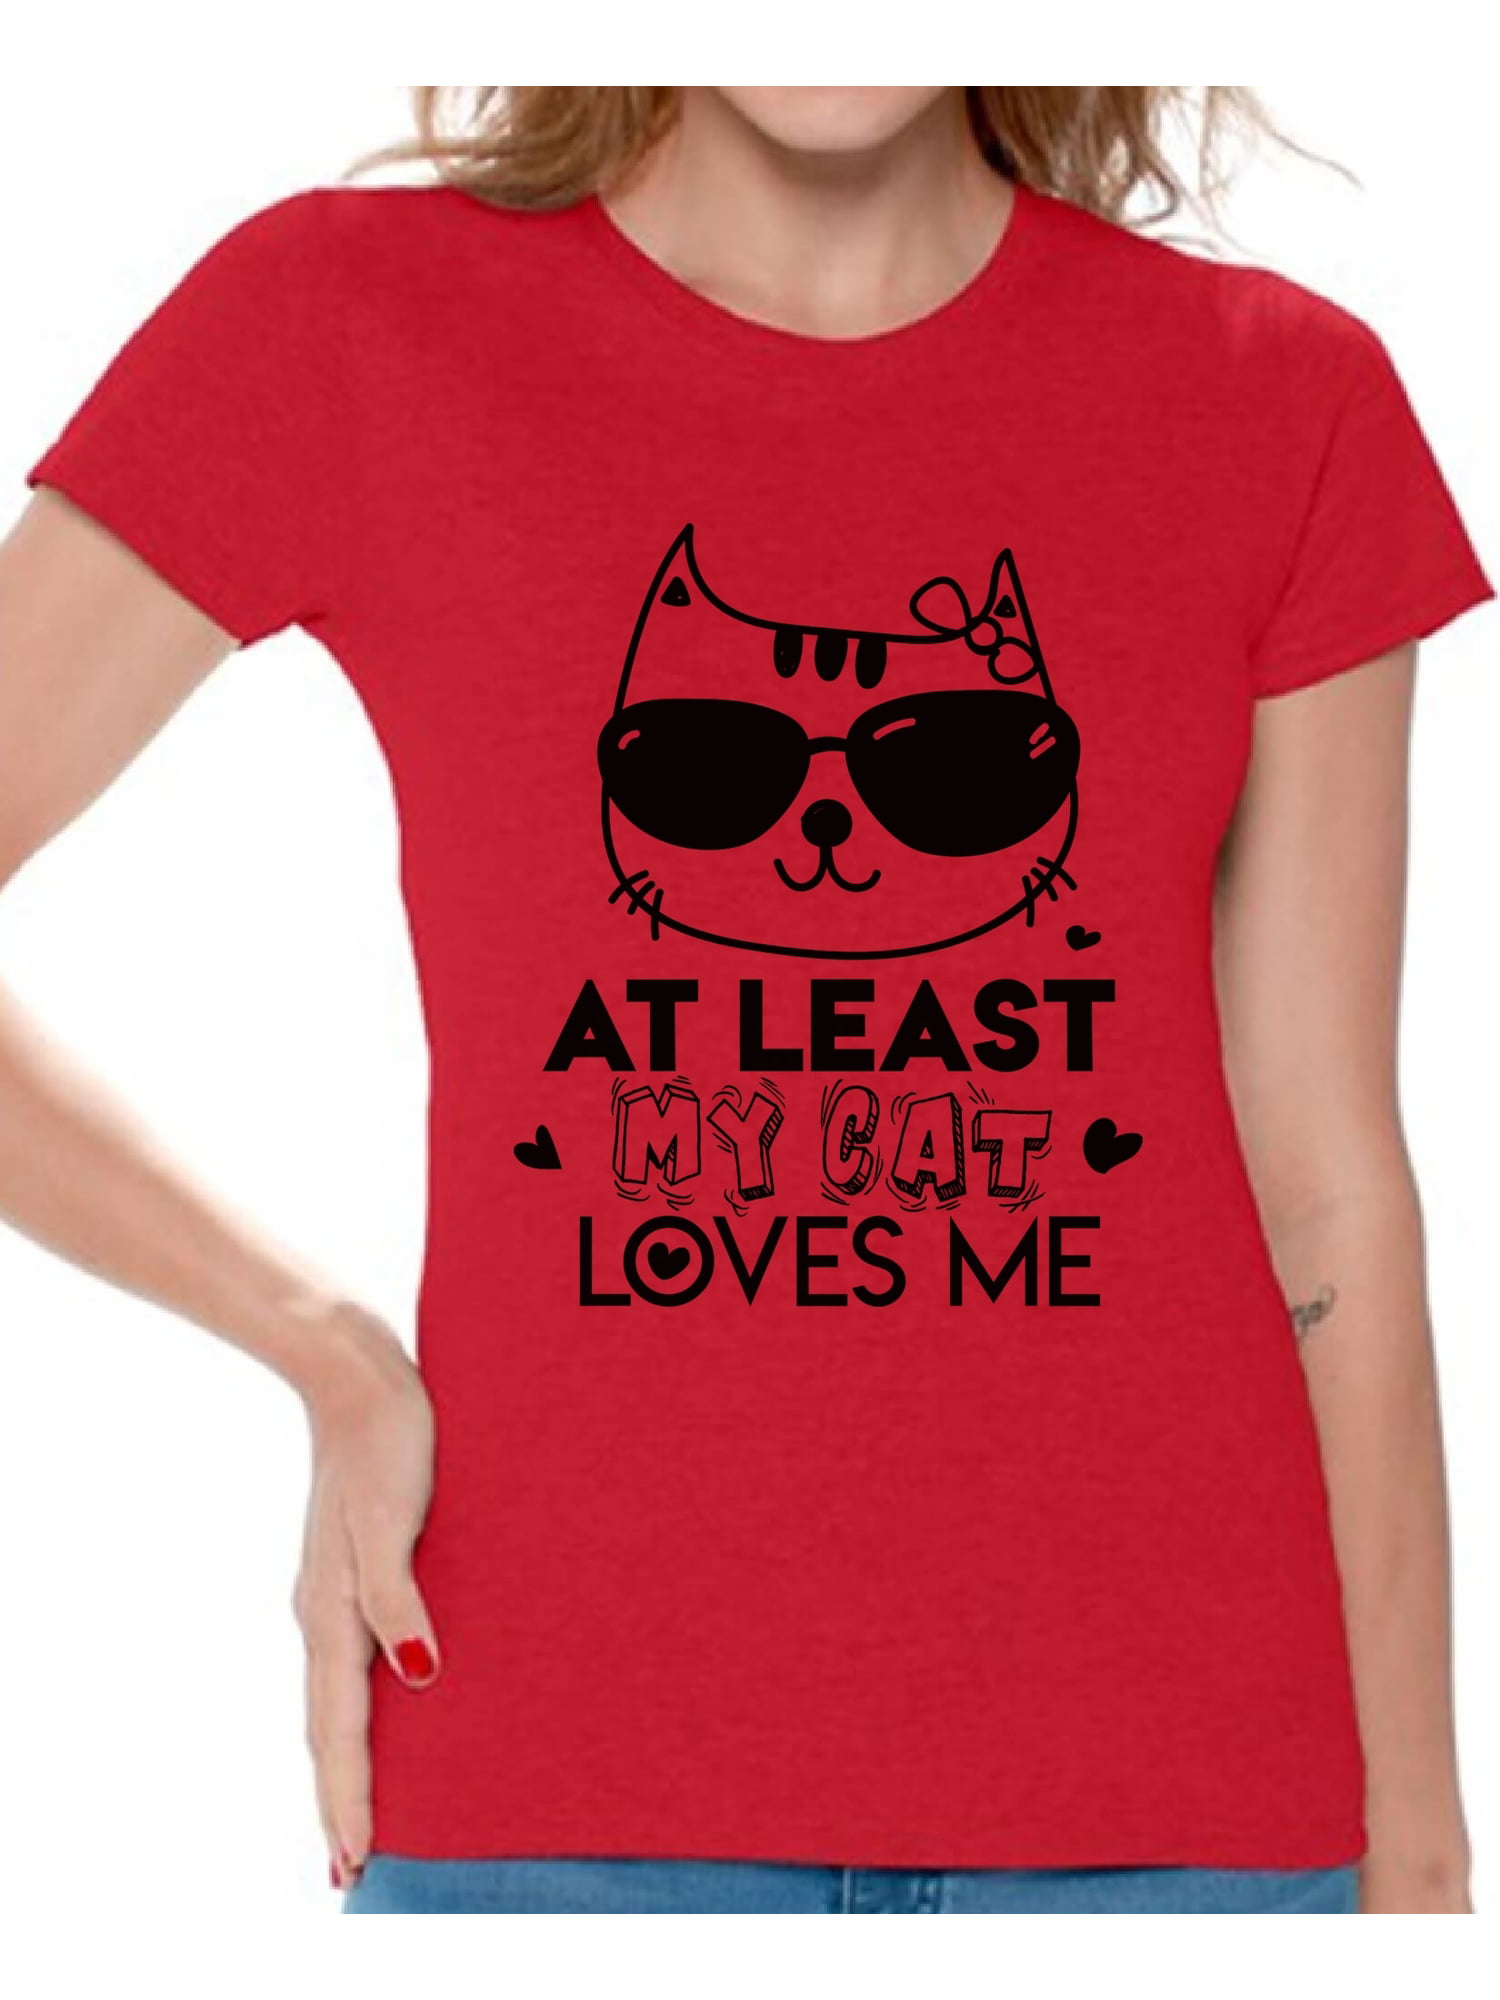 LOVE CATS LADIES T-SHIRT CUTE DESIGN FOR CAT ANIMAL LOVER GIFT IDEA FOR HER TOP